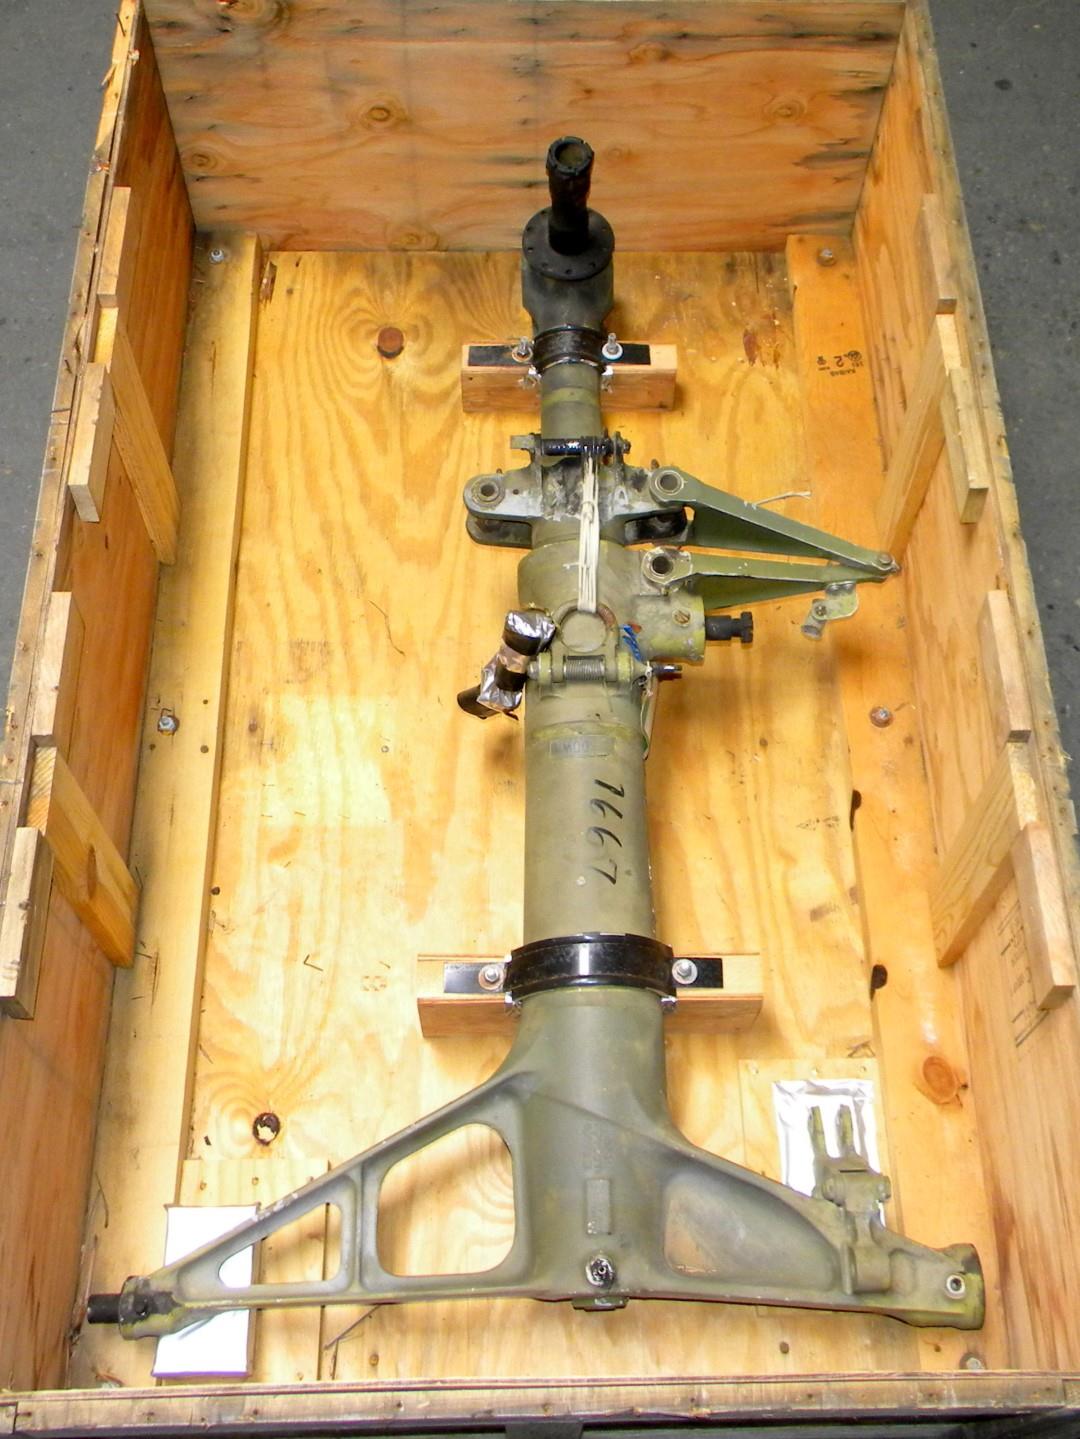 SP-1777 | 1620-00-883-1667 Helicopter Retractable Landing Gear USED (12).JPG